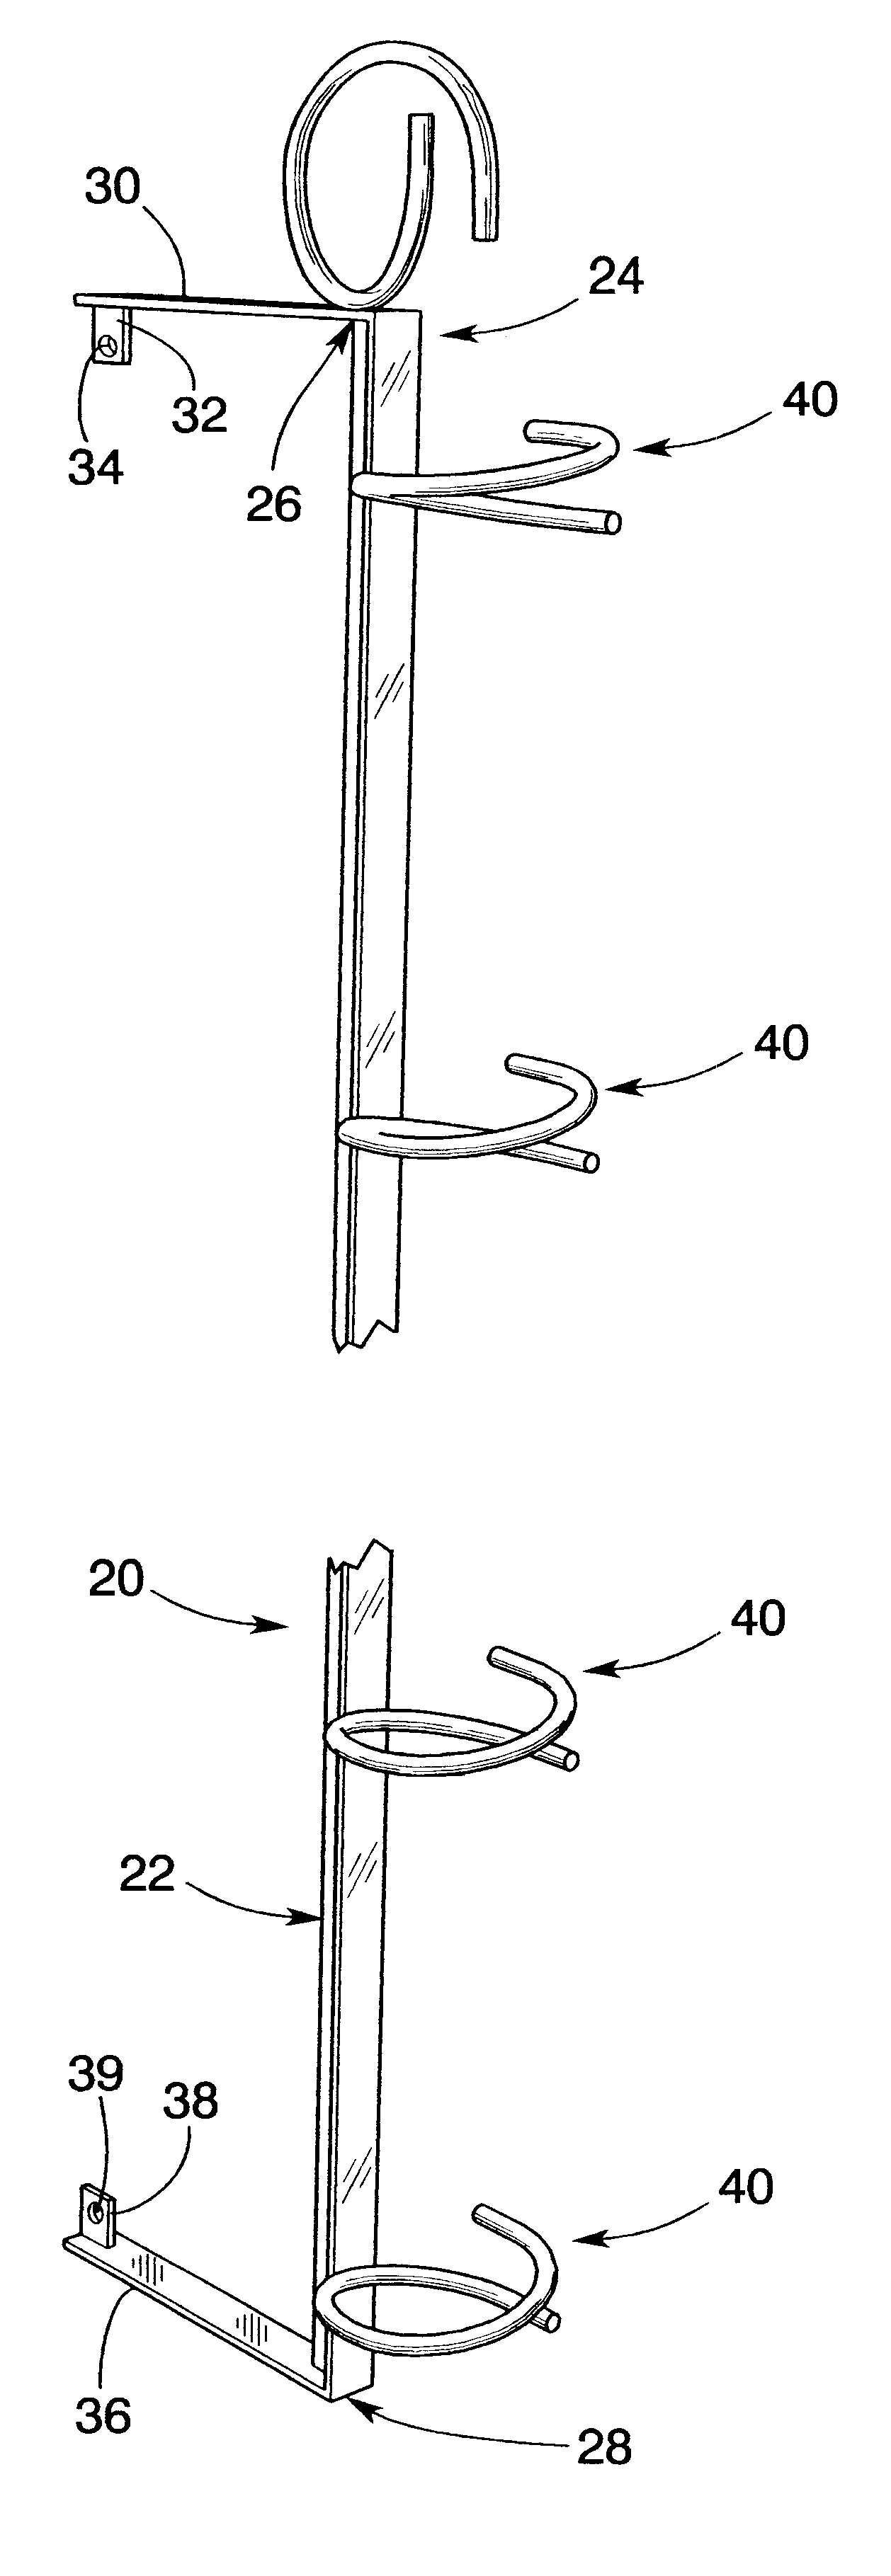 Cable management apparatus and method